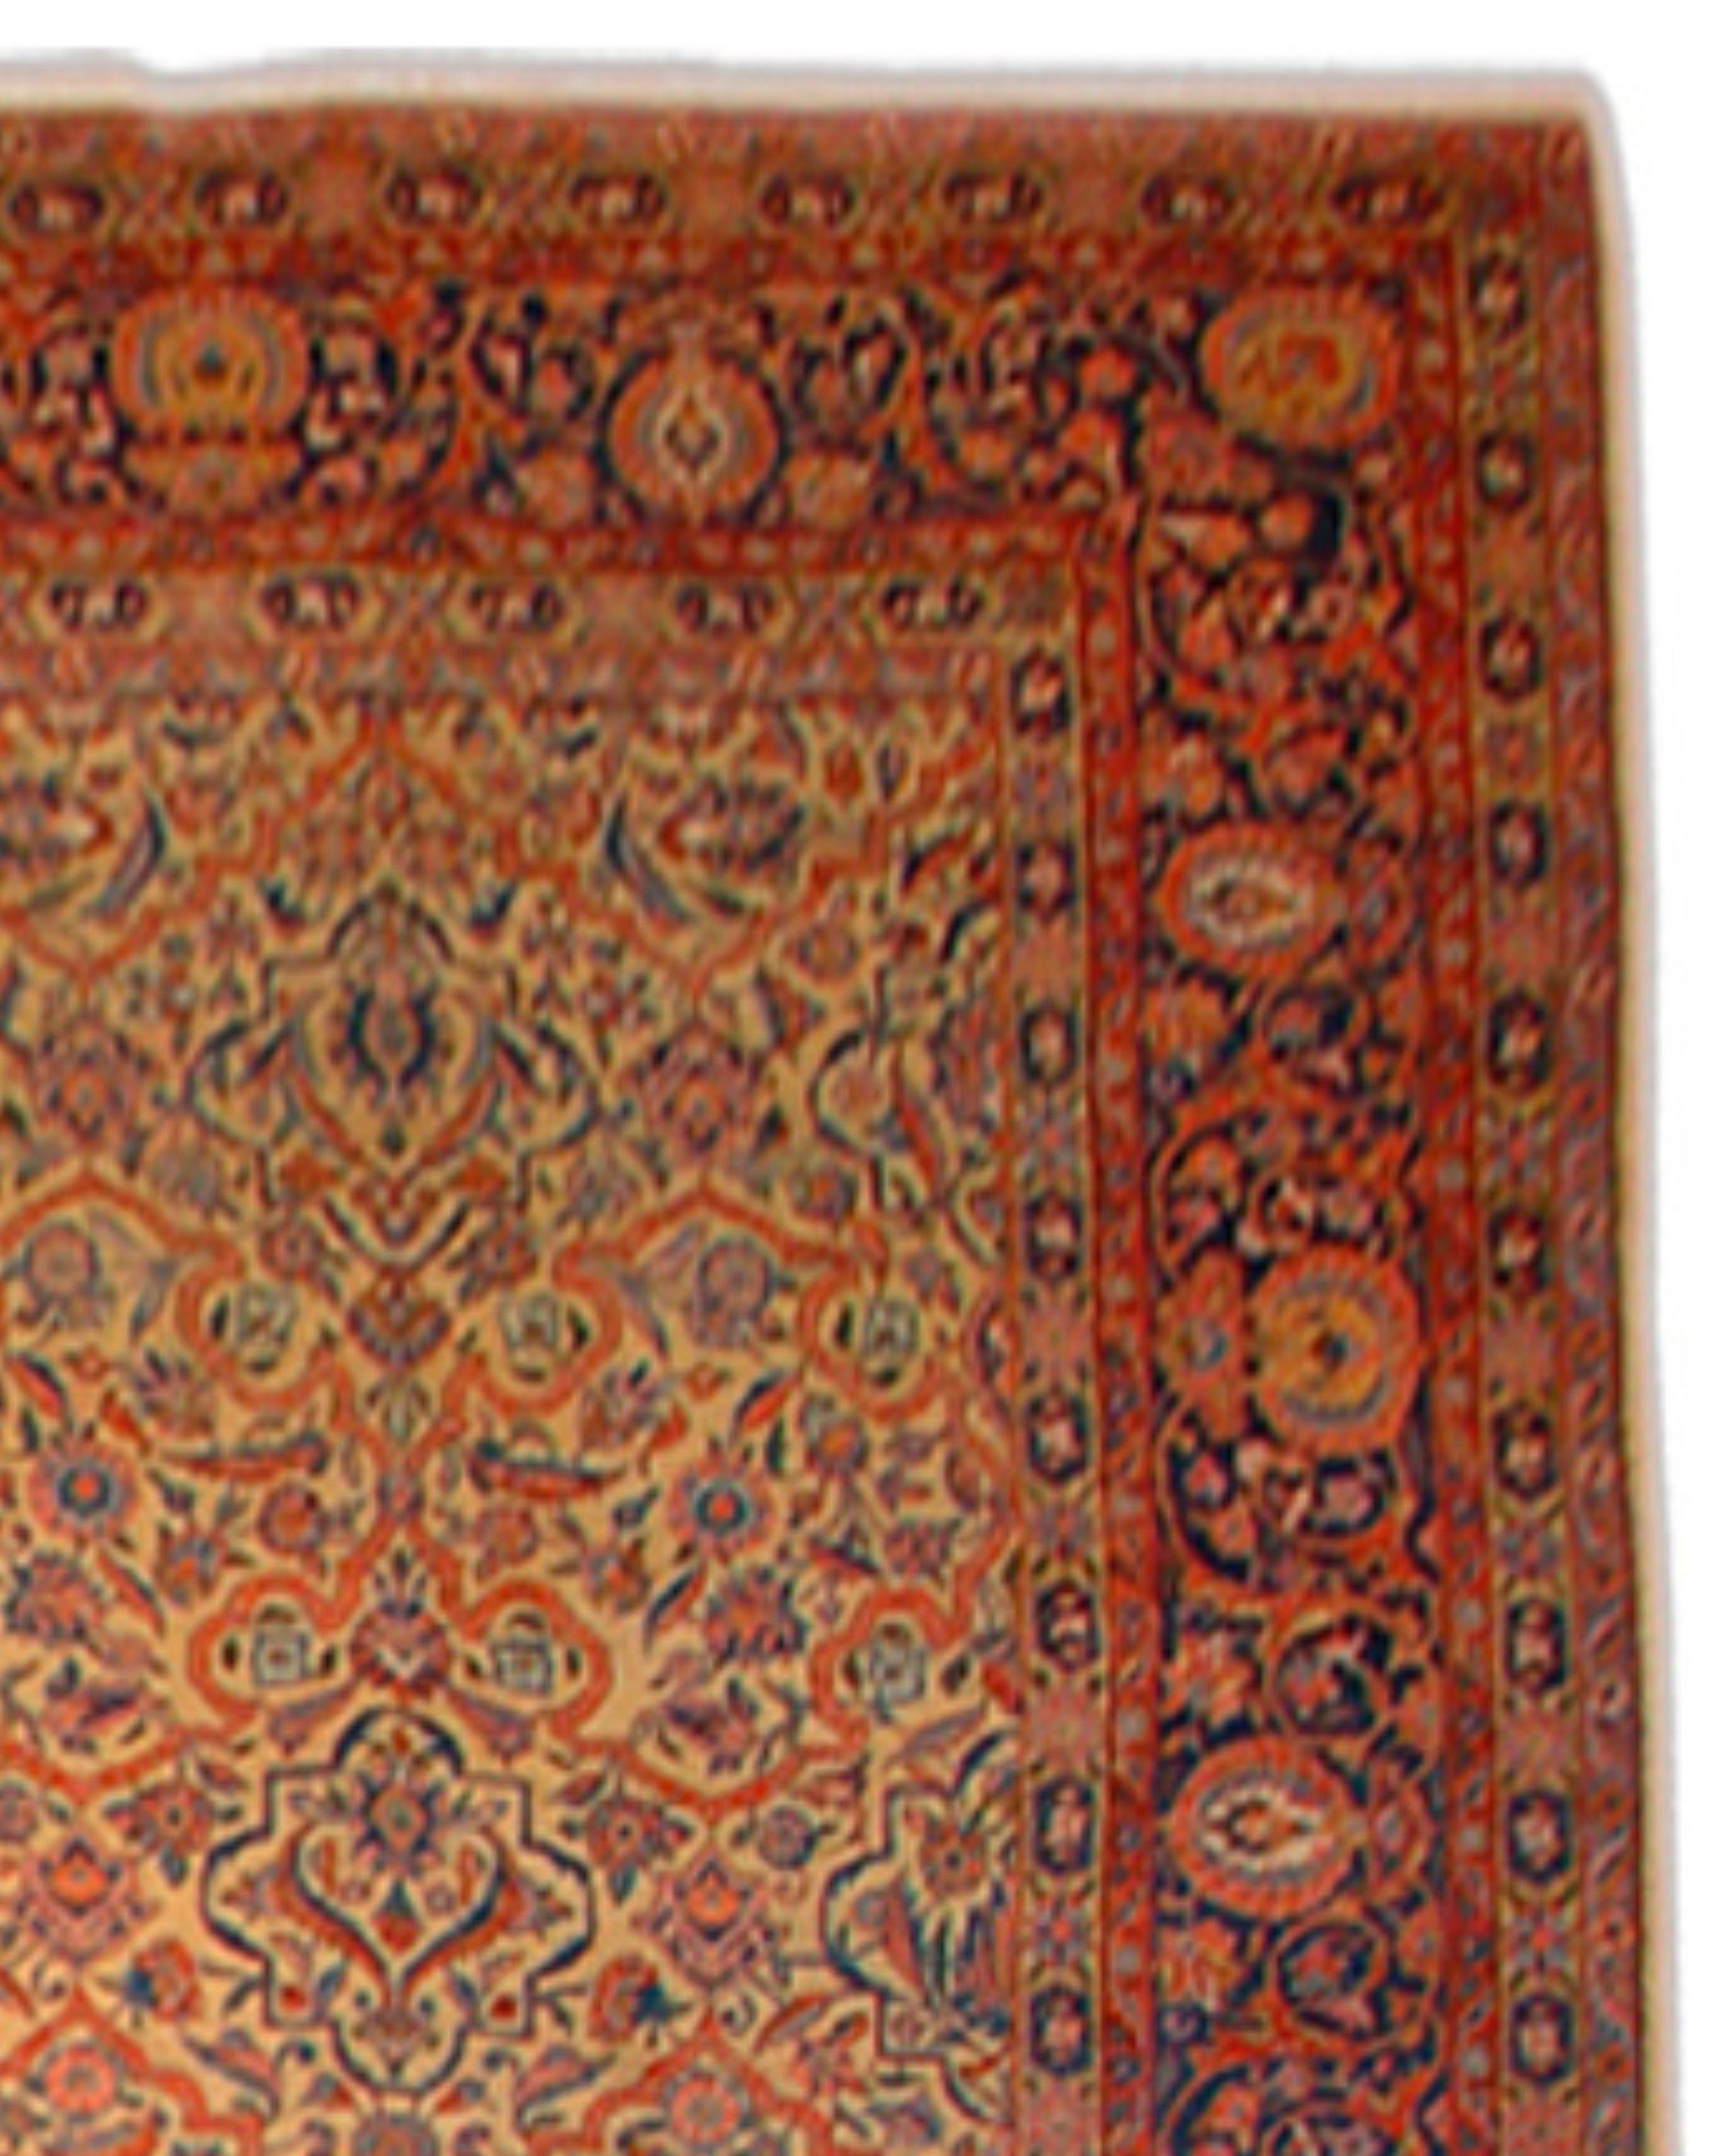 Antique Large Persian Kashan Rug, Early 20th Century

Against a pleasant golden ground, this Kashan carpet draws an allover umber-red lattice network that forms alternating diamonds and quatrefoils. Alternating within rows of the lattice are lobed